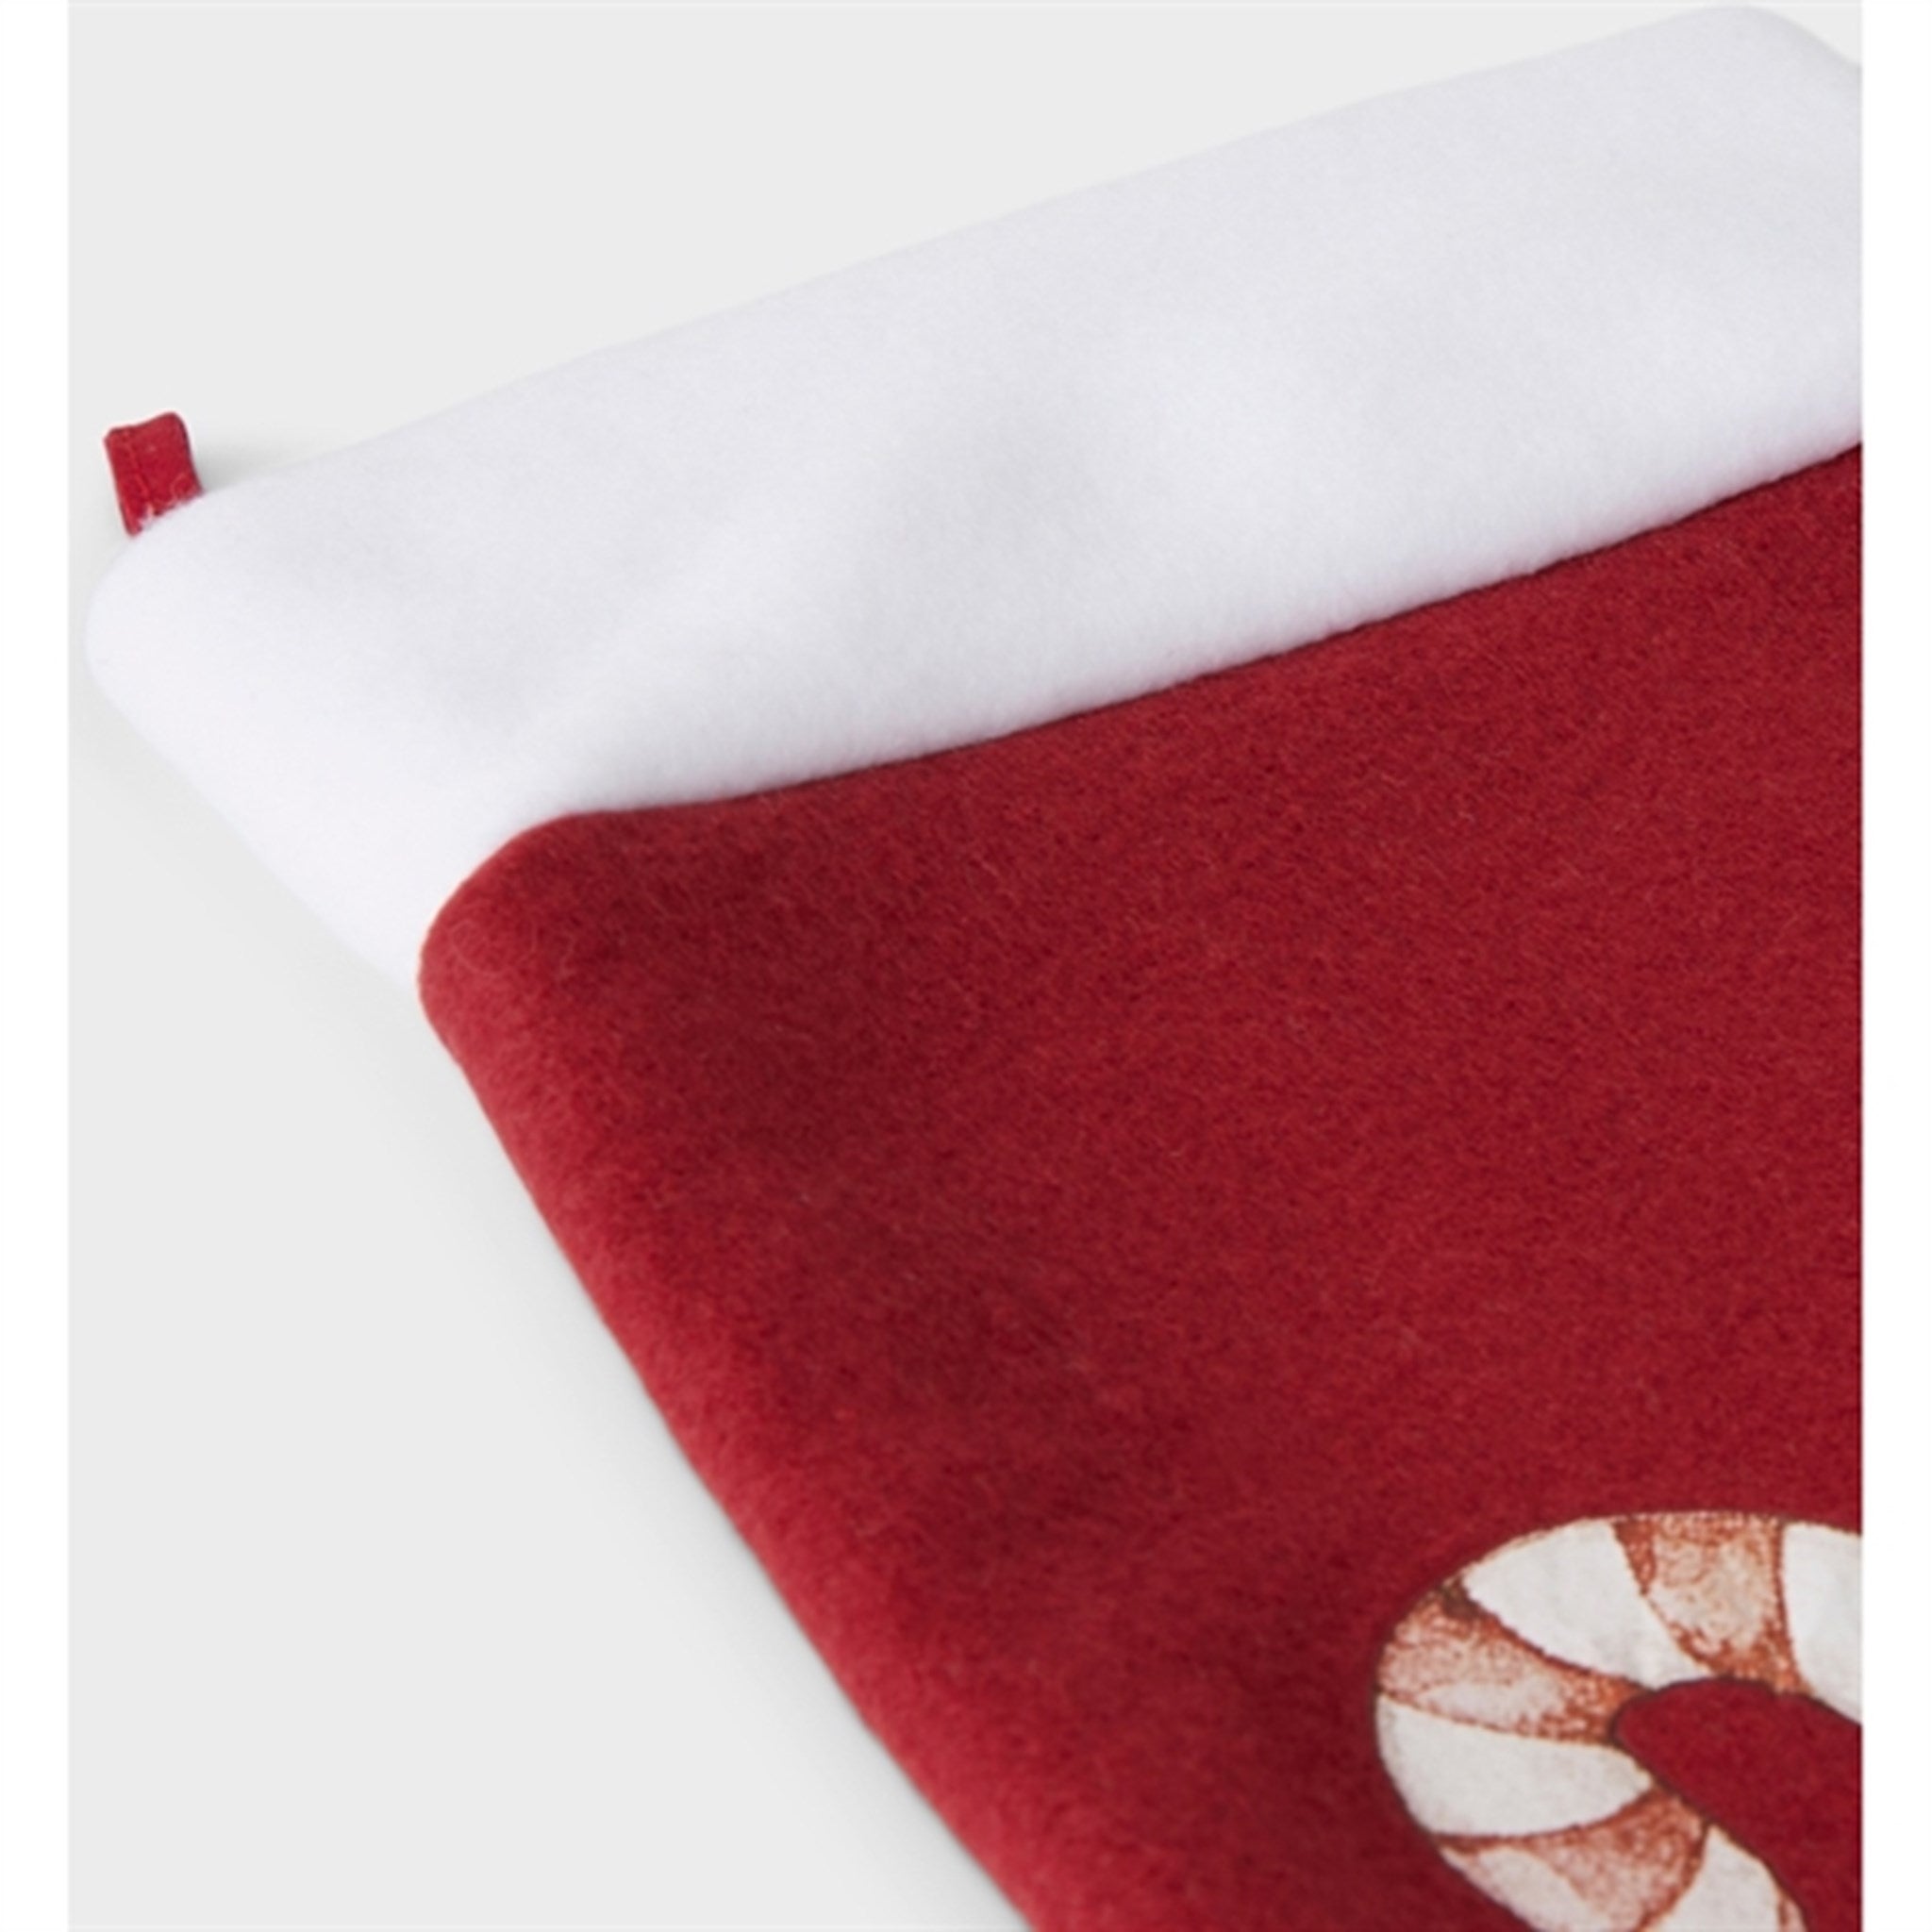 Name it Jester Red Rana Candy Cane Christmas Stocking 2